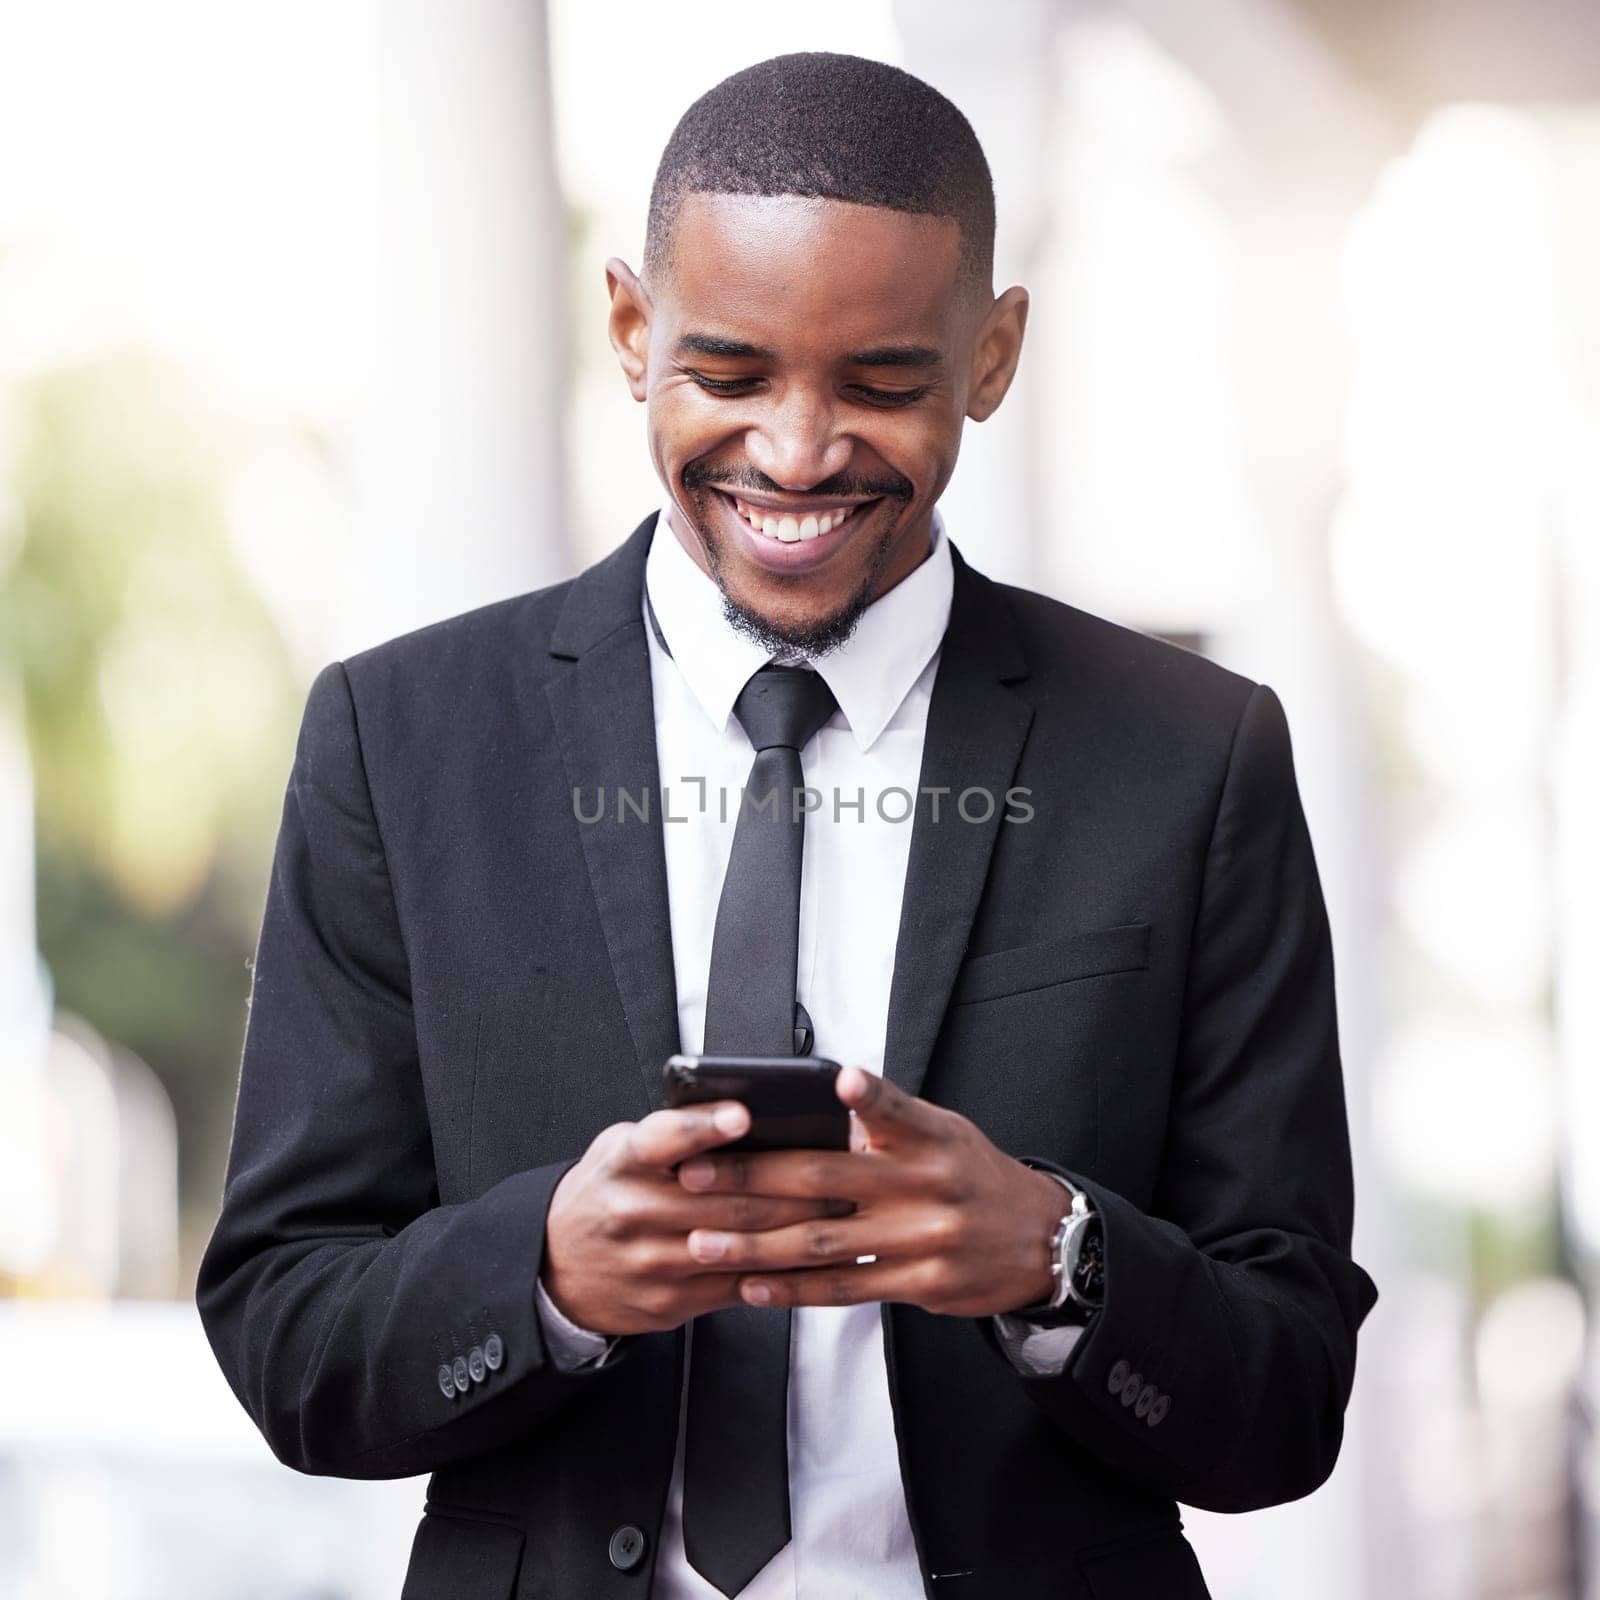 Professional, travel and black man with smartphone in city for ride share, online location or commute. Search, smile and lawyer on mobile for transport service, taxi or drive app in urban town.